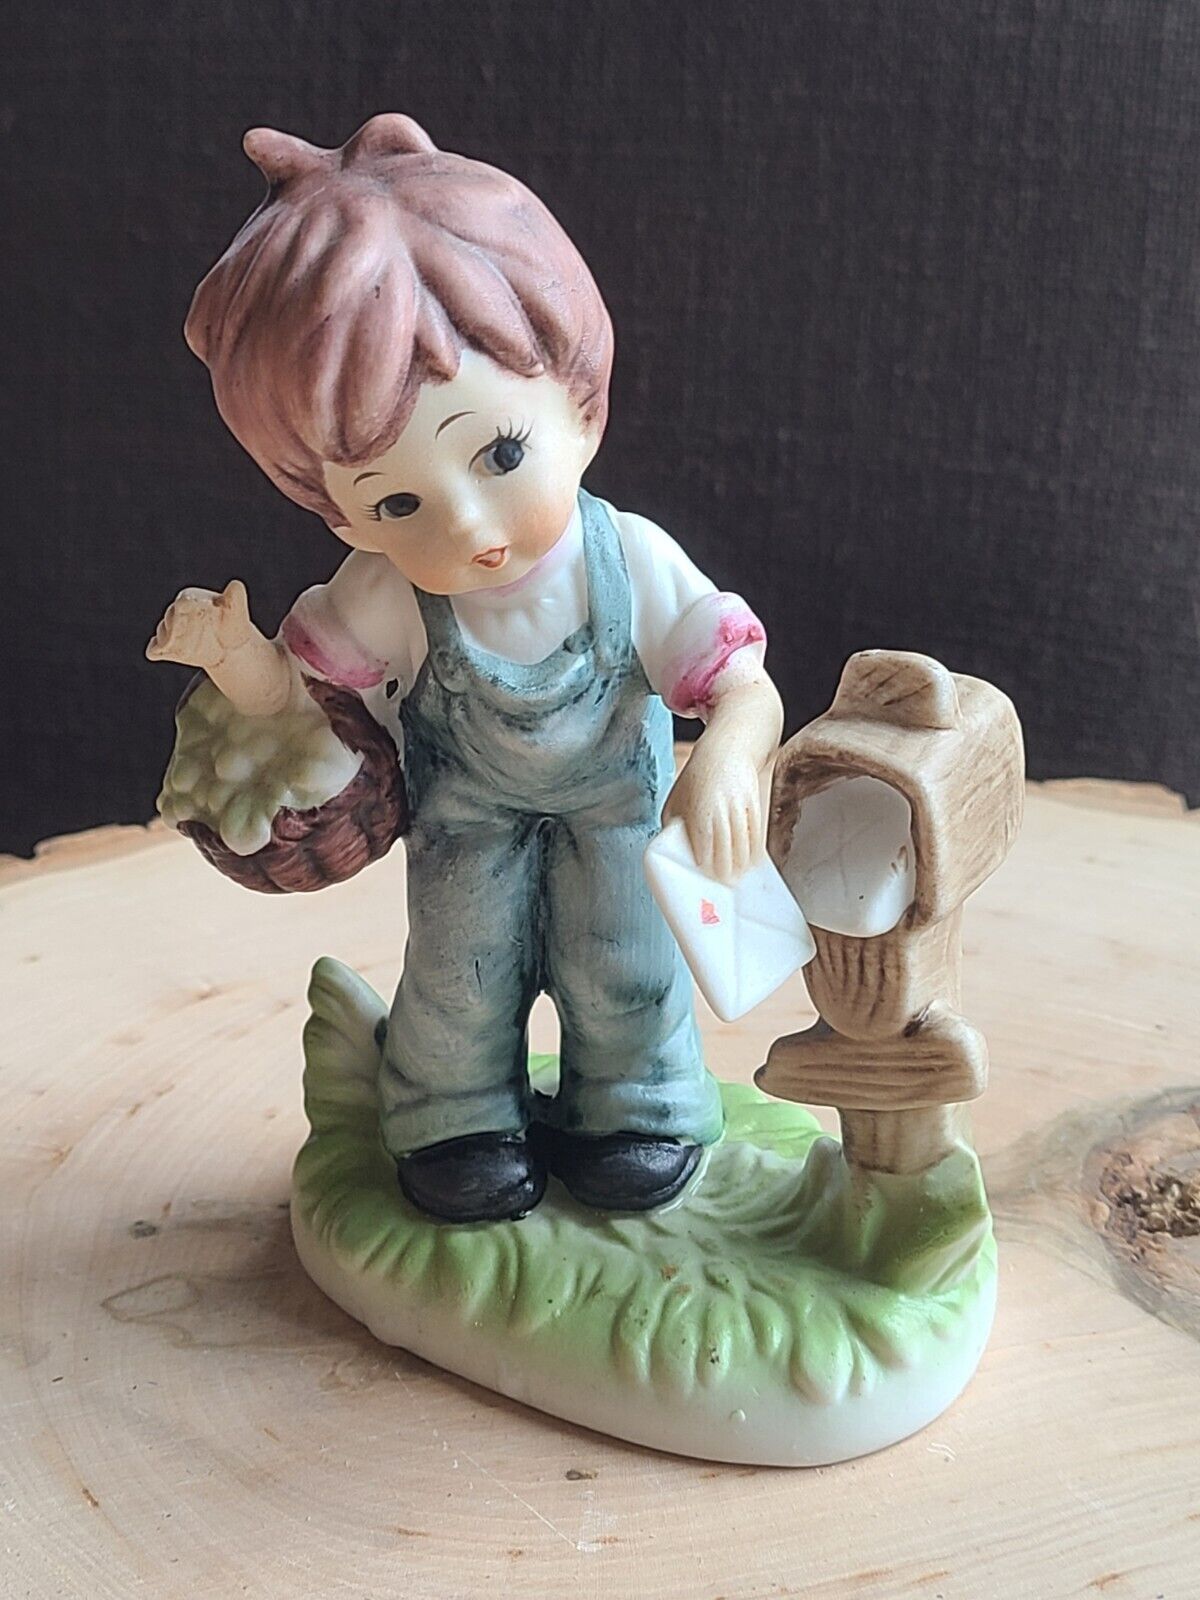 Vintage Boy with Letter and Mailbox figurine Overalls Basket Heart